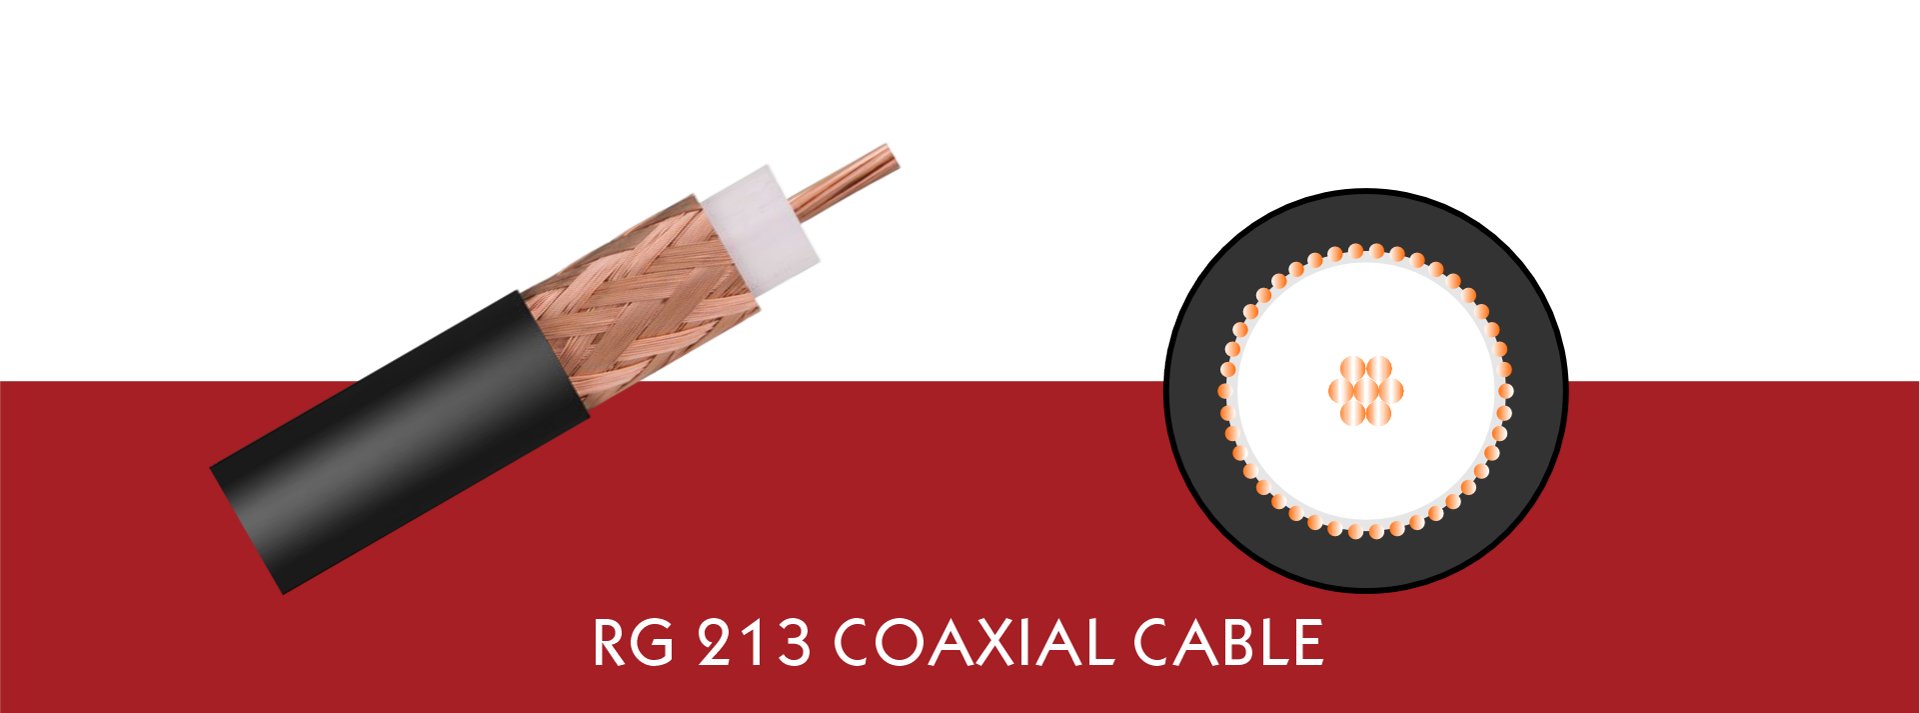 RG 213 COAXIAL CABLE